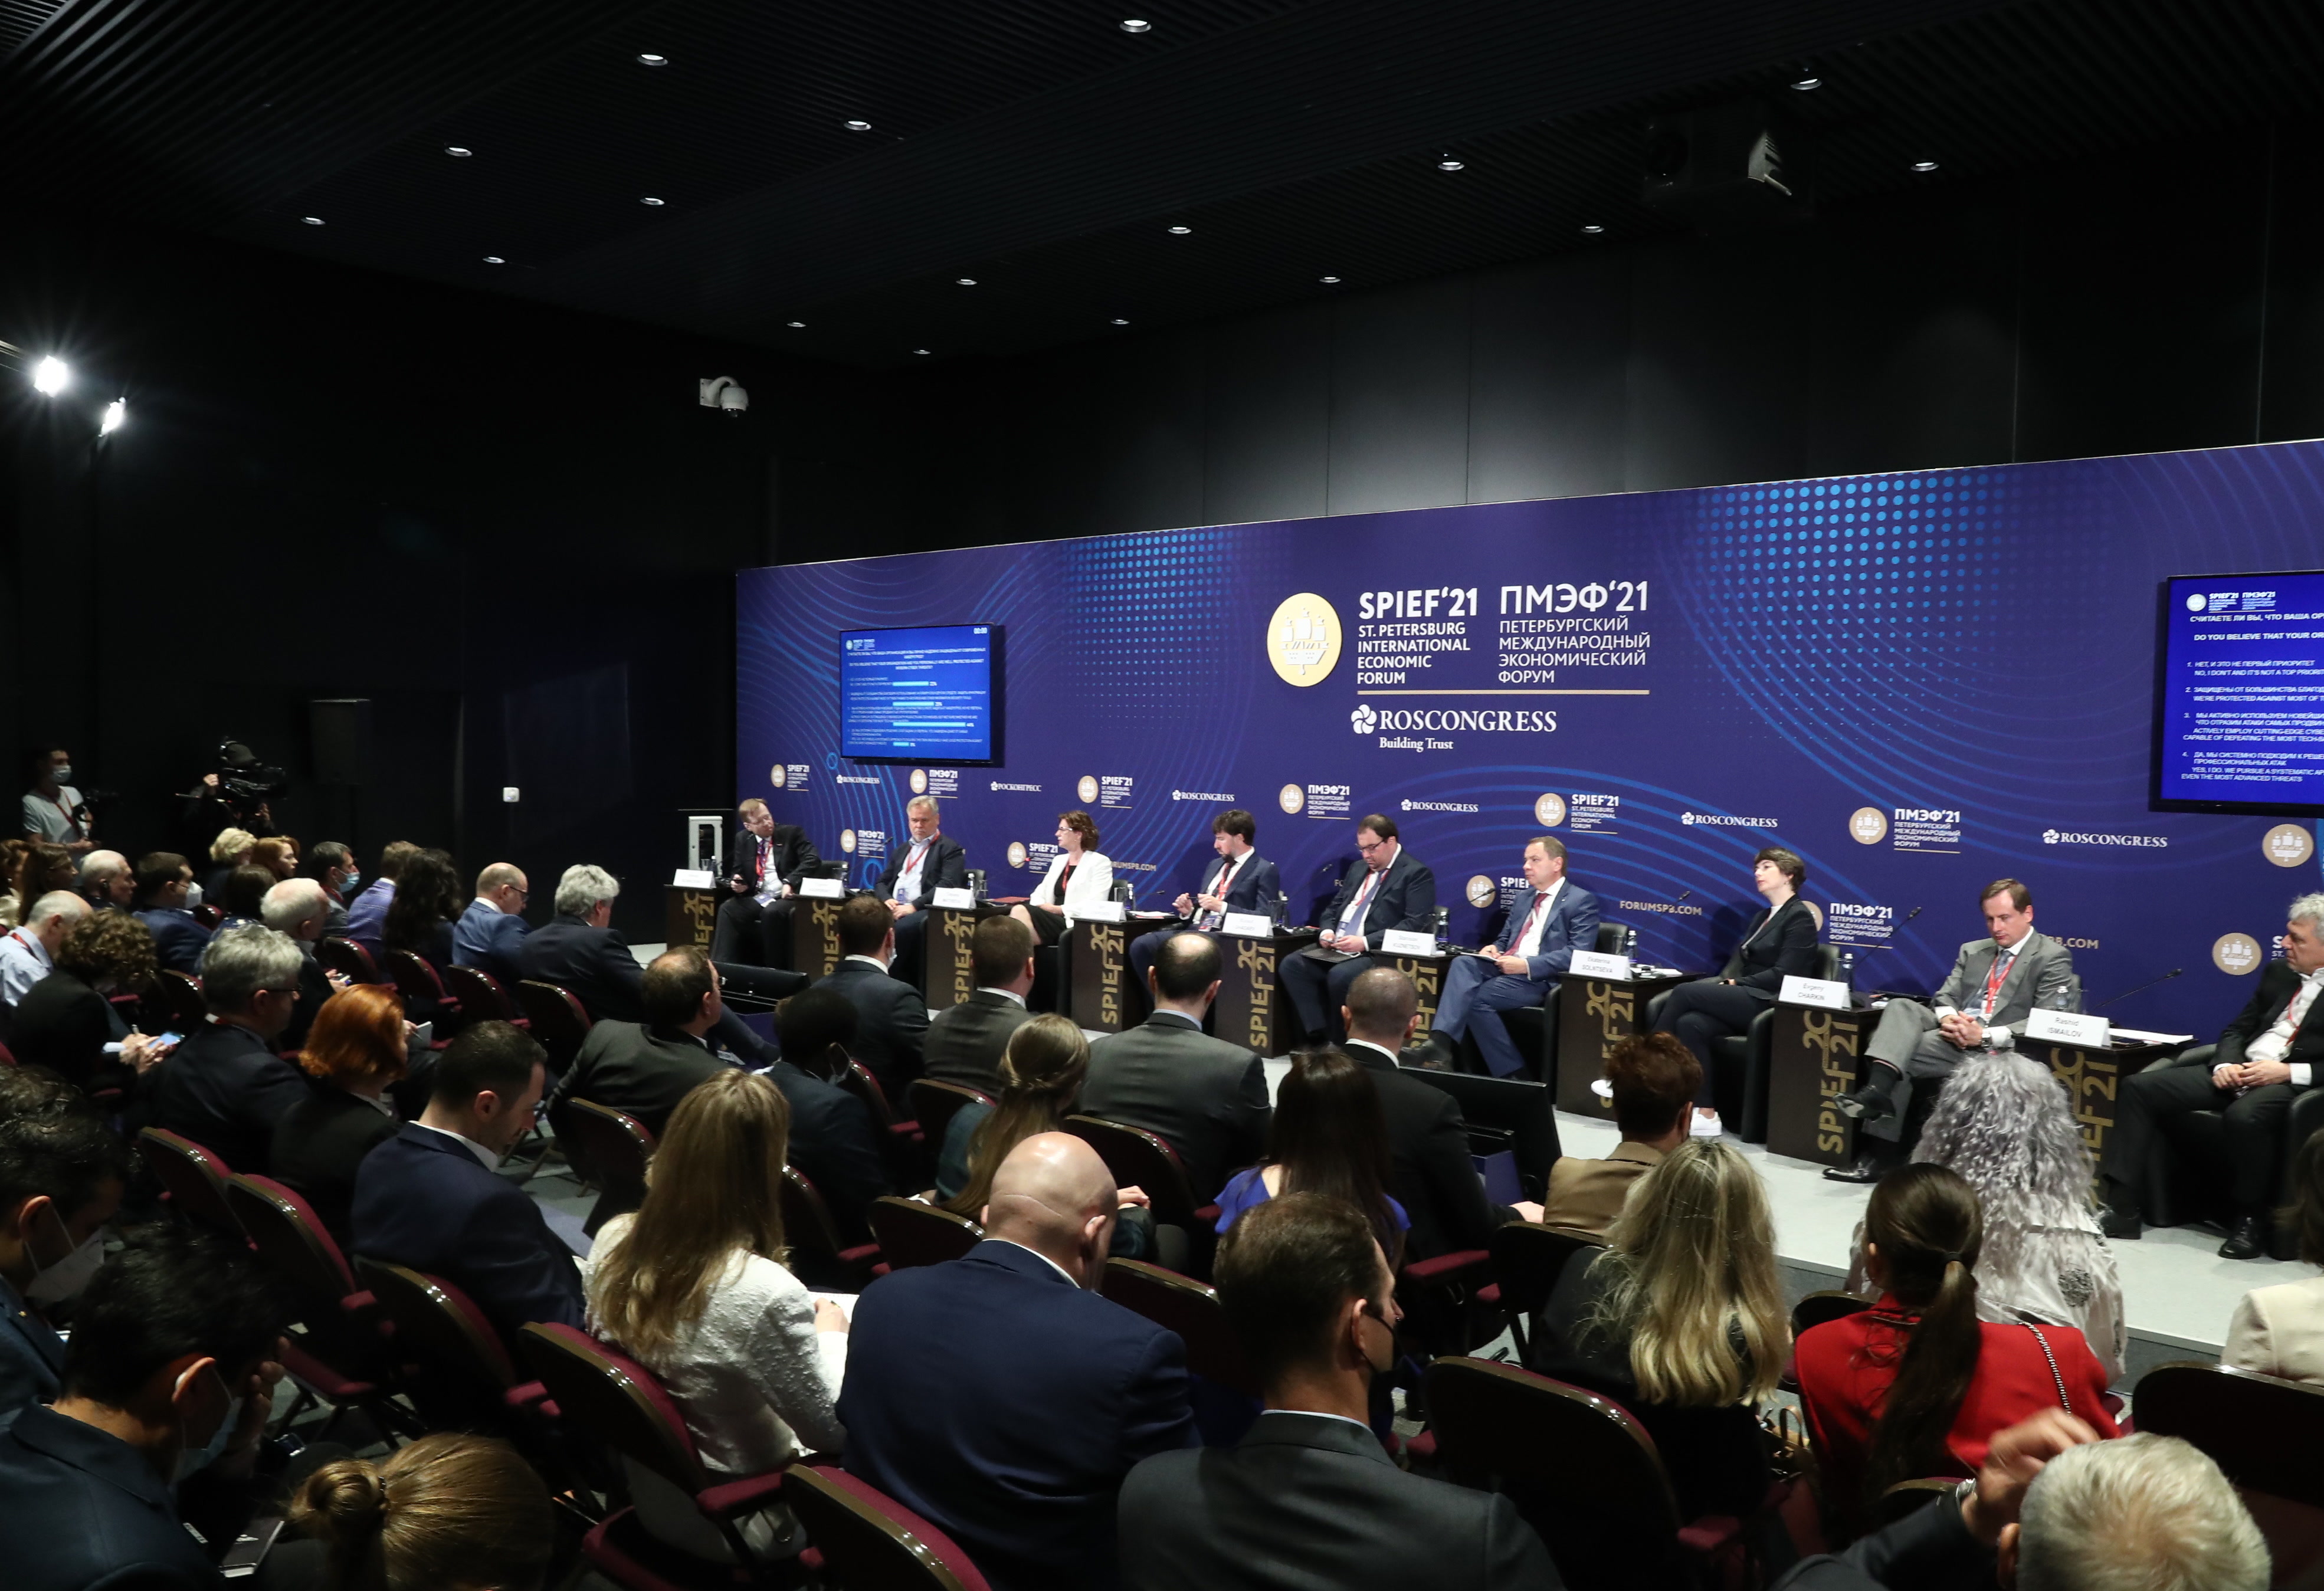 SPIEF session on digital sovereignty and cyber security